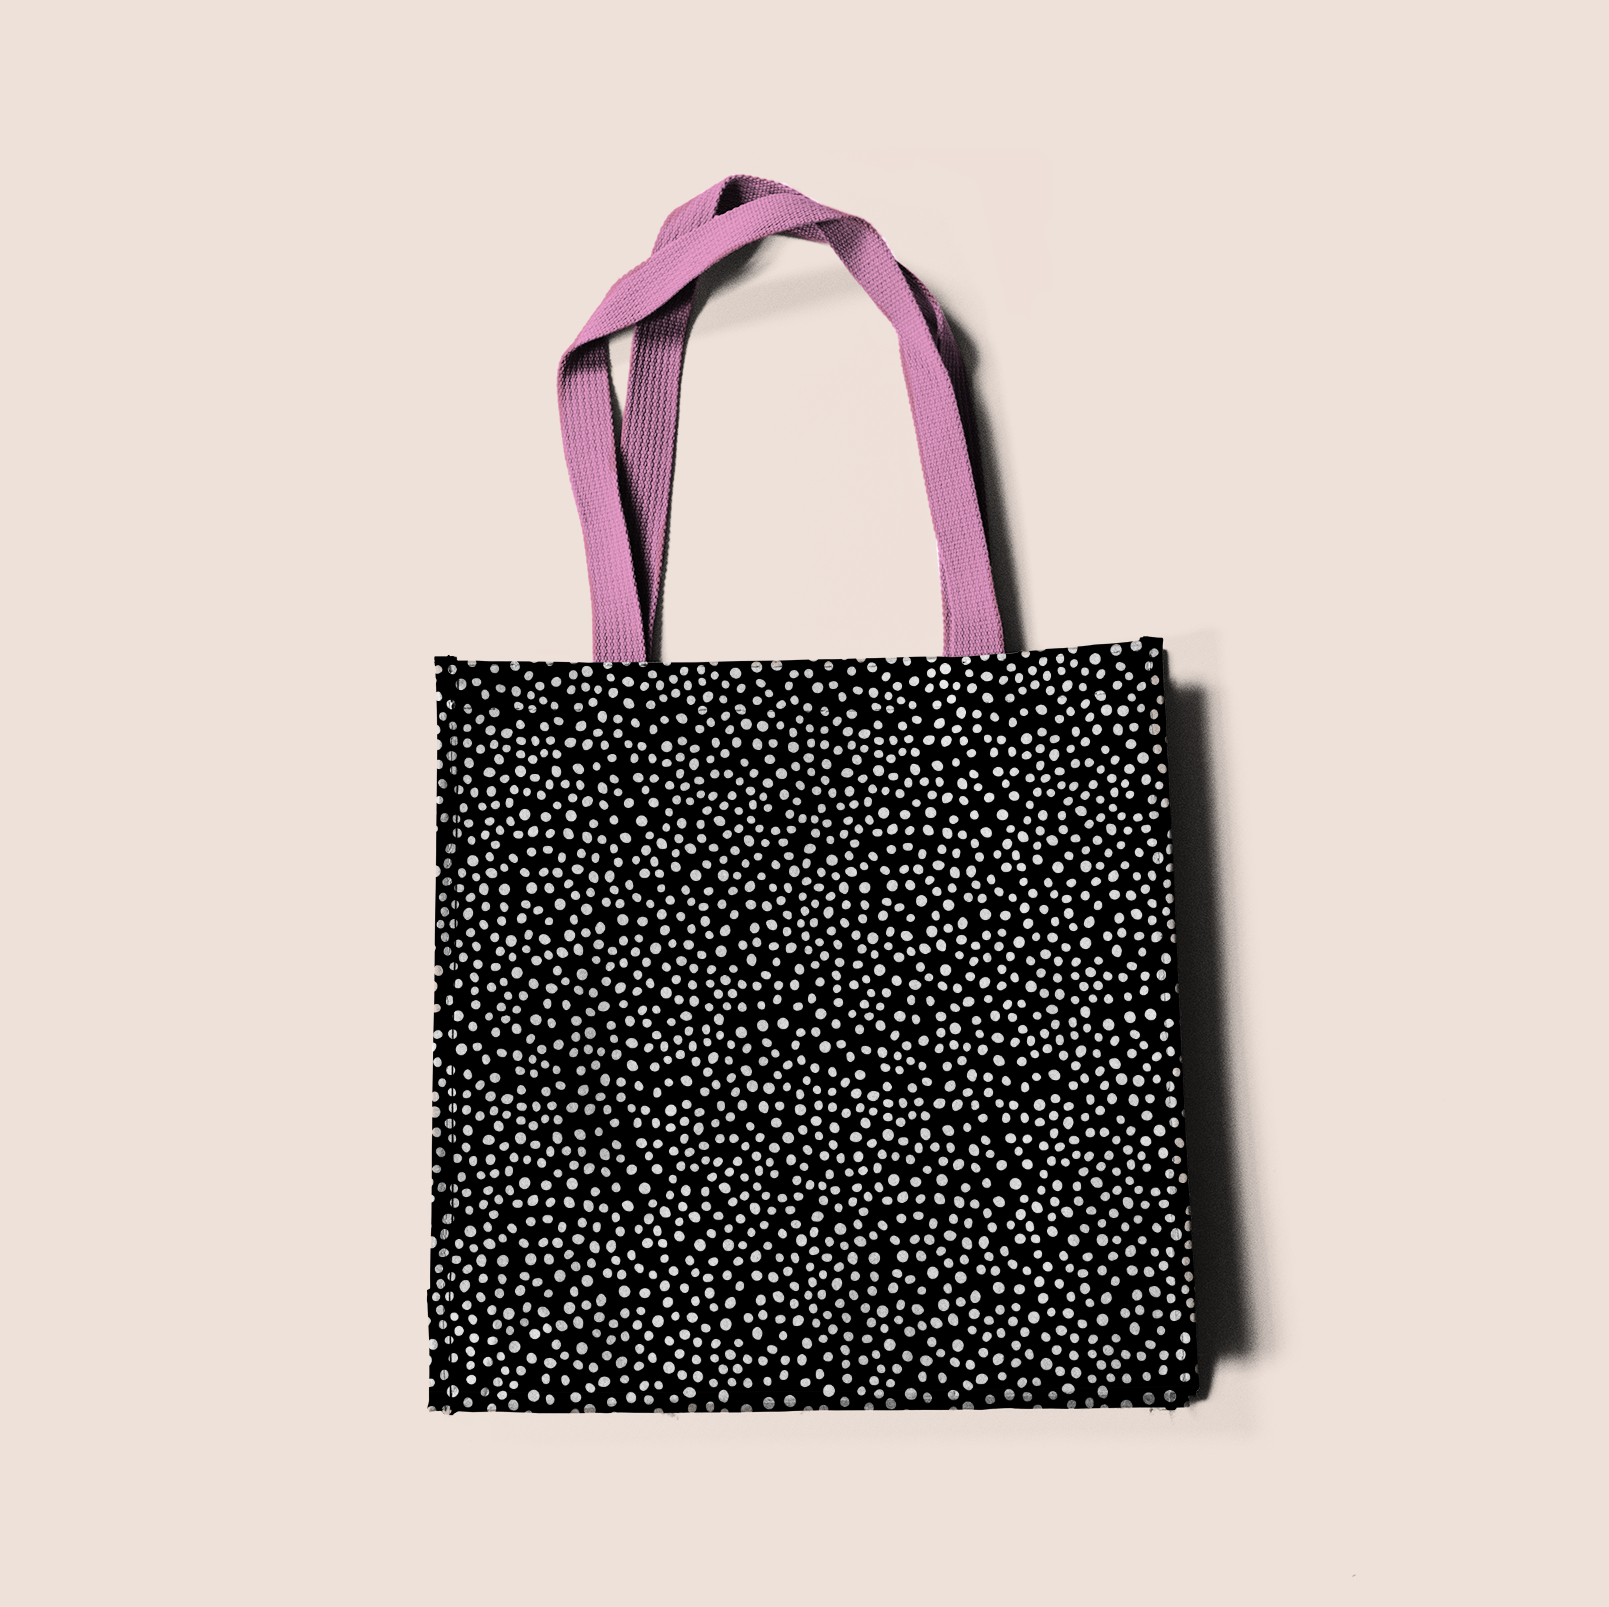 bubbles black & white in inverse pattern design printed on recycled fabric bags mockup